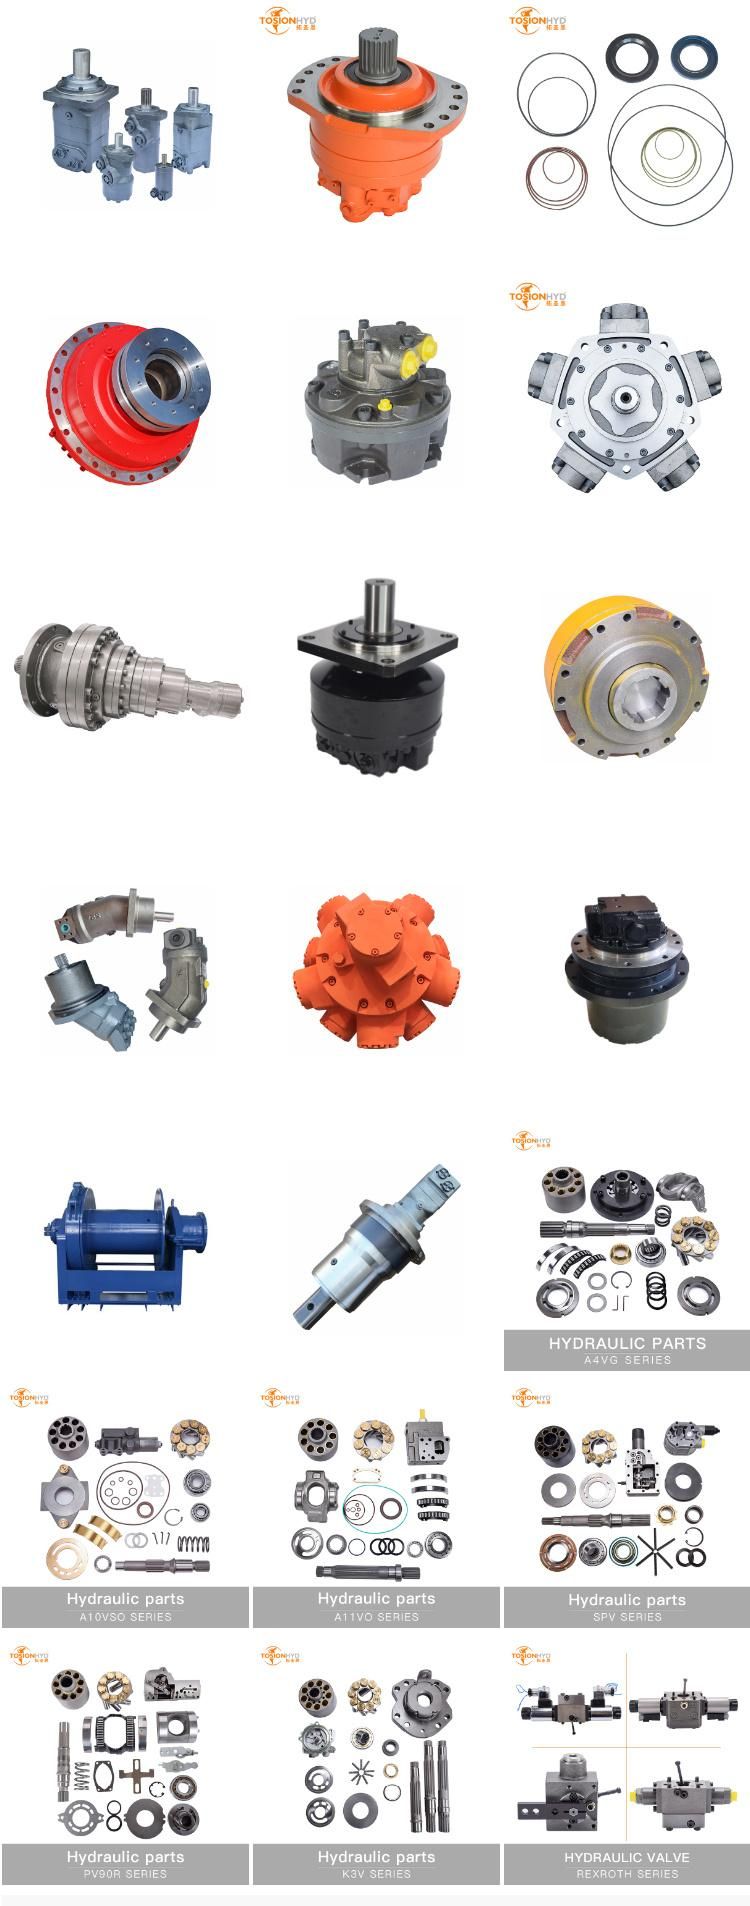 A7vo 250 Hydraulic Pump Parts with Rexroth Spare Repair Kits